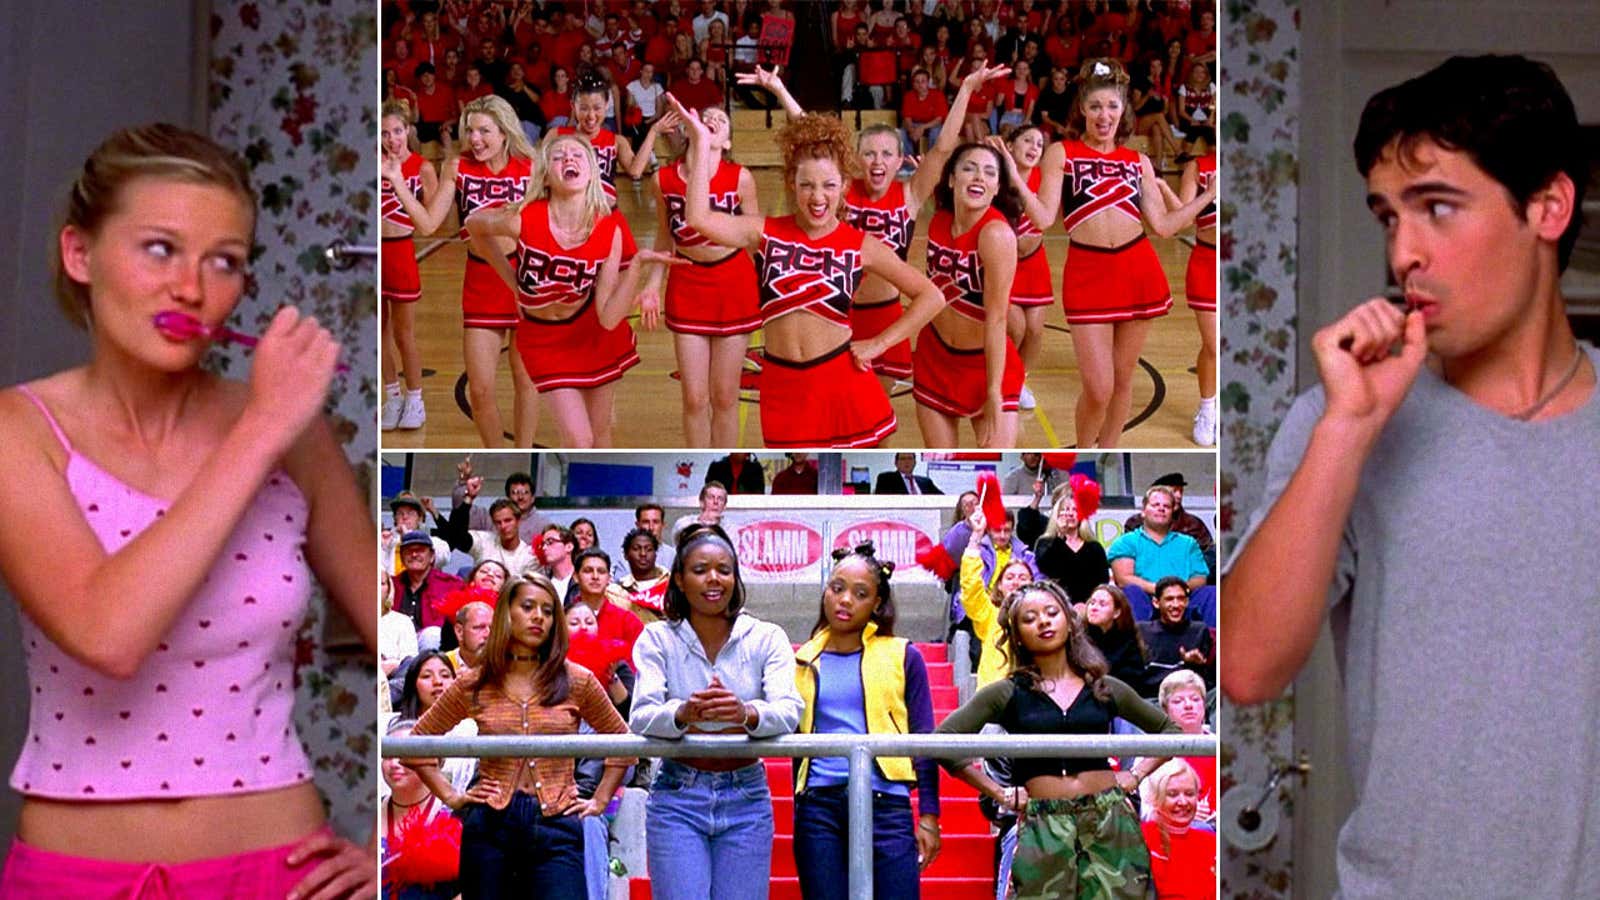 Bring It On (Universal Pictures)